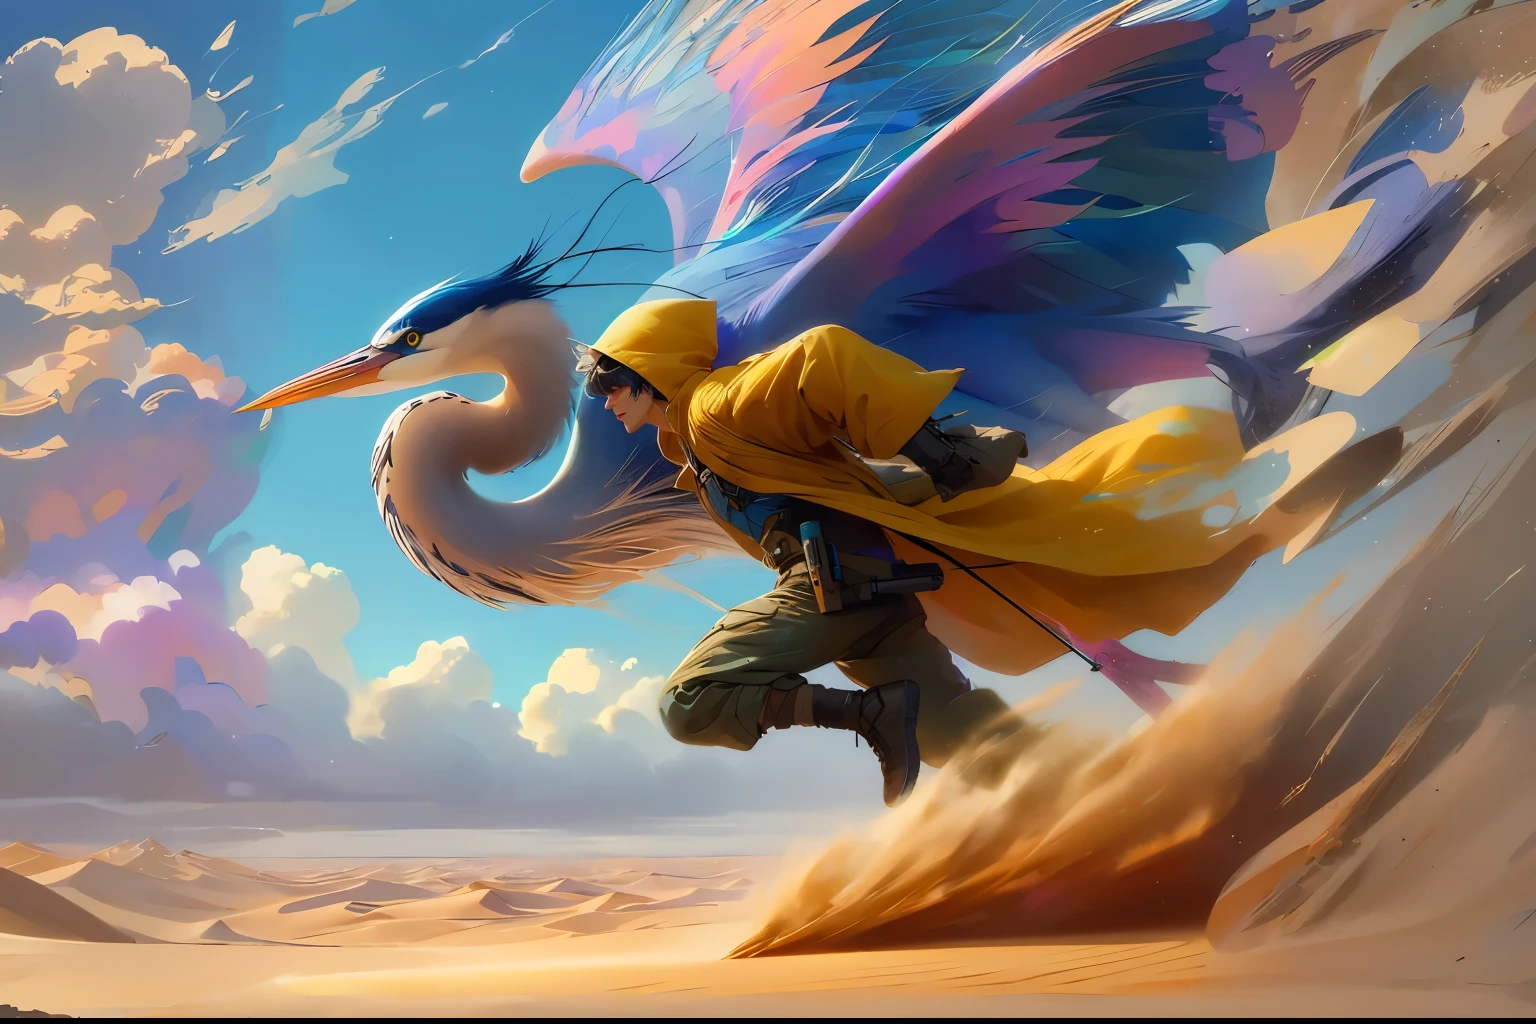 Man riding on the back of a blue heron, bird looks like blue heron, blue sky desert sands, long shot, man wearing long dusty yellow overcoat with hood and futuristic goggles, large vista, running, wind blowing, muted pastel multicolors feathers slightly curly, paint splatter, paint splatter, throwing up dust, sand dunes, running in desert sand, kicking up sand, dust, sand plumbs, fluffy white clouds tinged in pinks, oranges and violet, anime impressionist art style, 8k resolution,